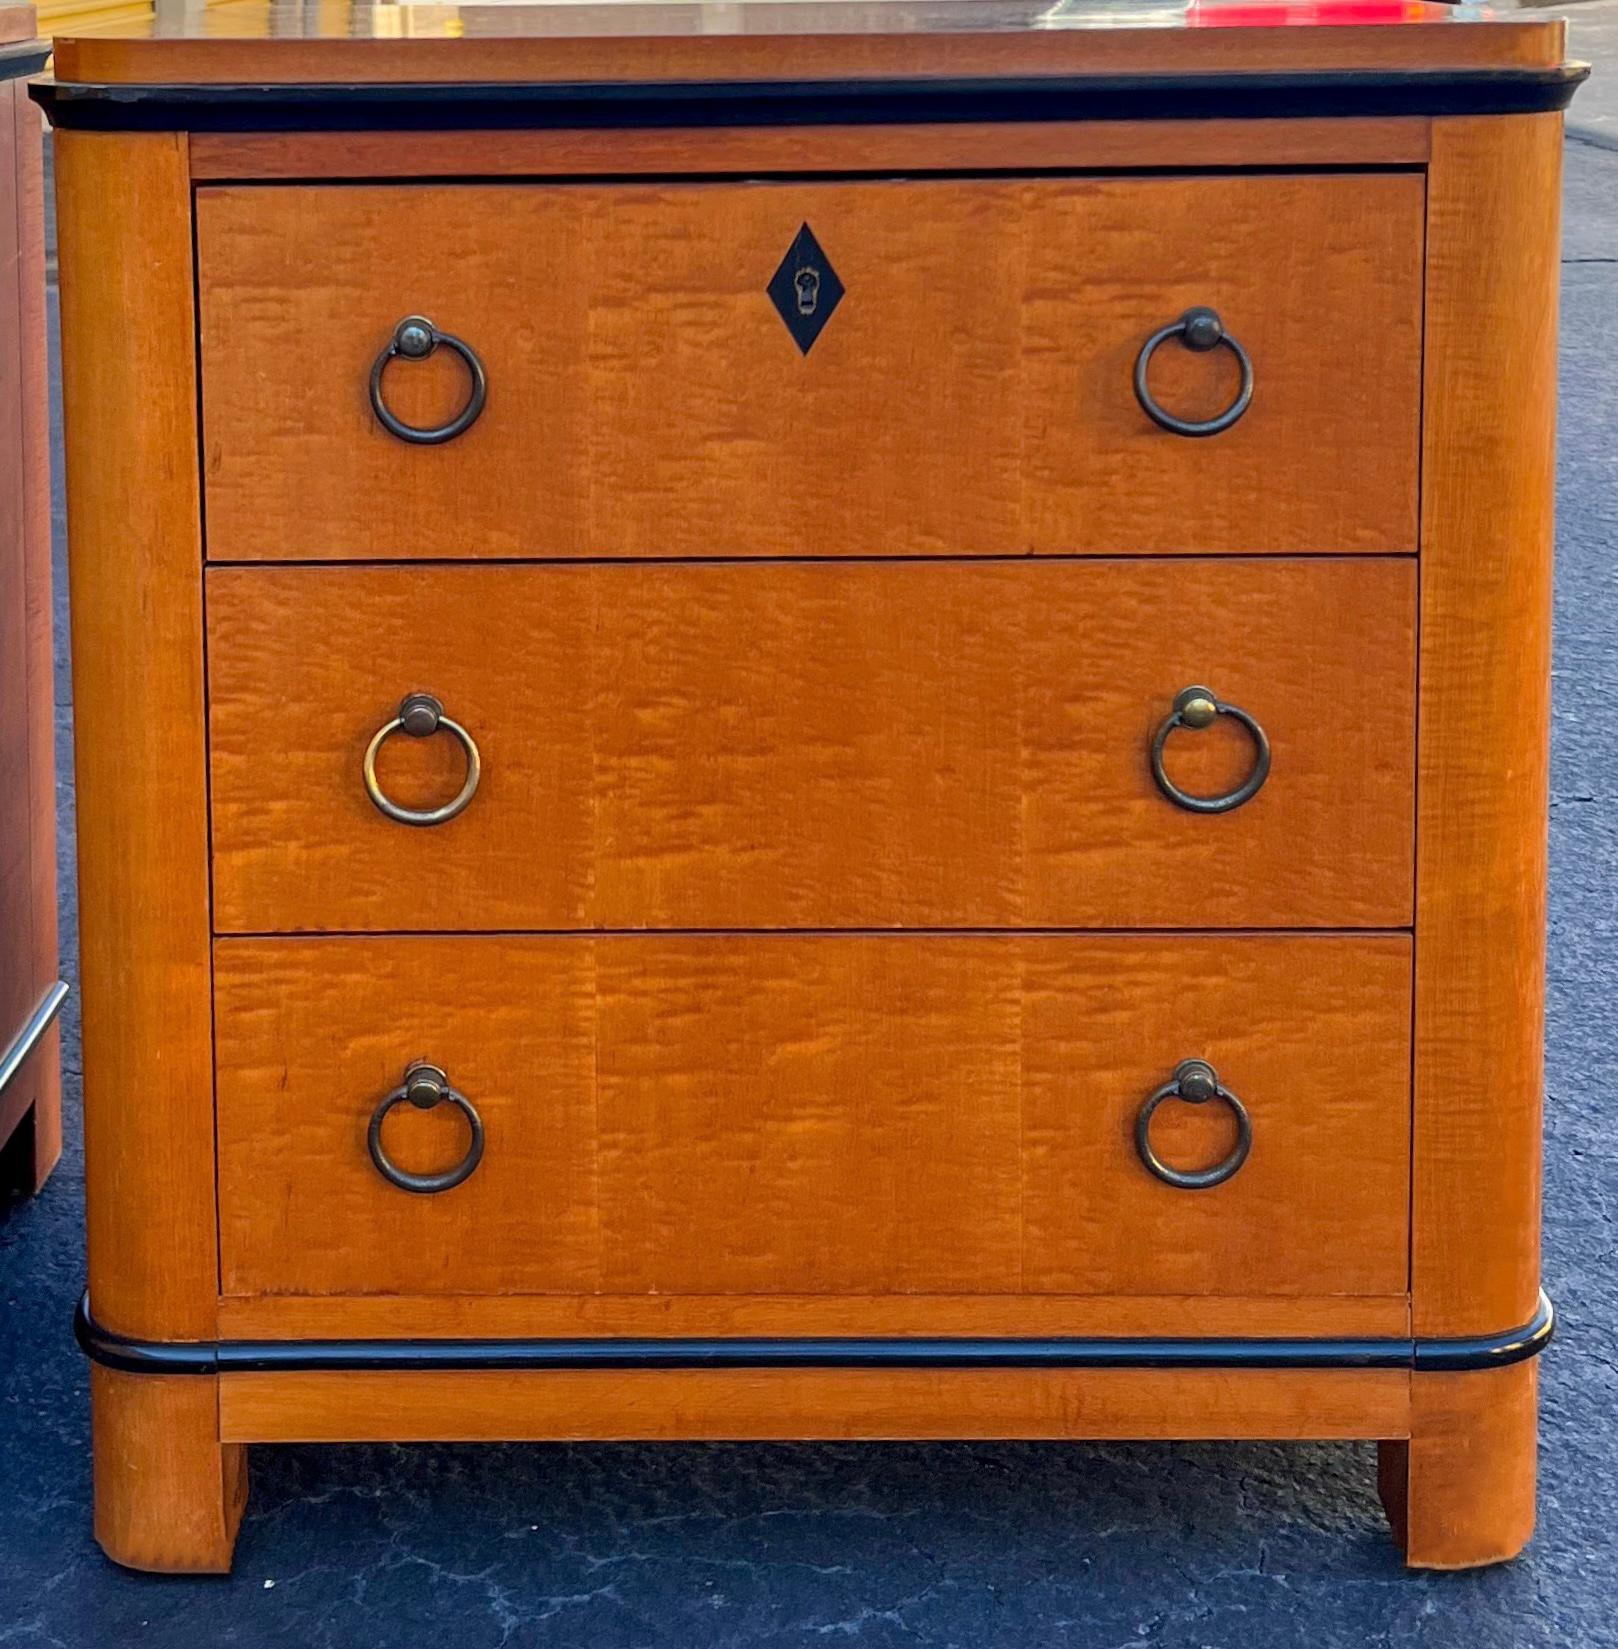 This is a versatile pair of chests. They have Biedermeier styling and could work as side tables or chests. They are by National Mt. Airy. They appear to be cherry with a pinstripe inlay and do have dovetail construction.